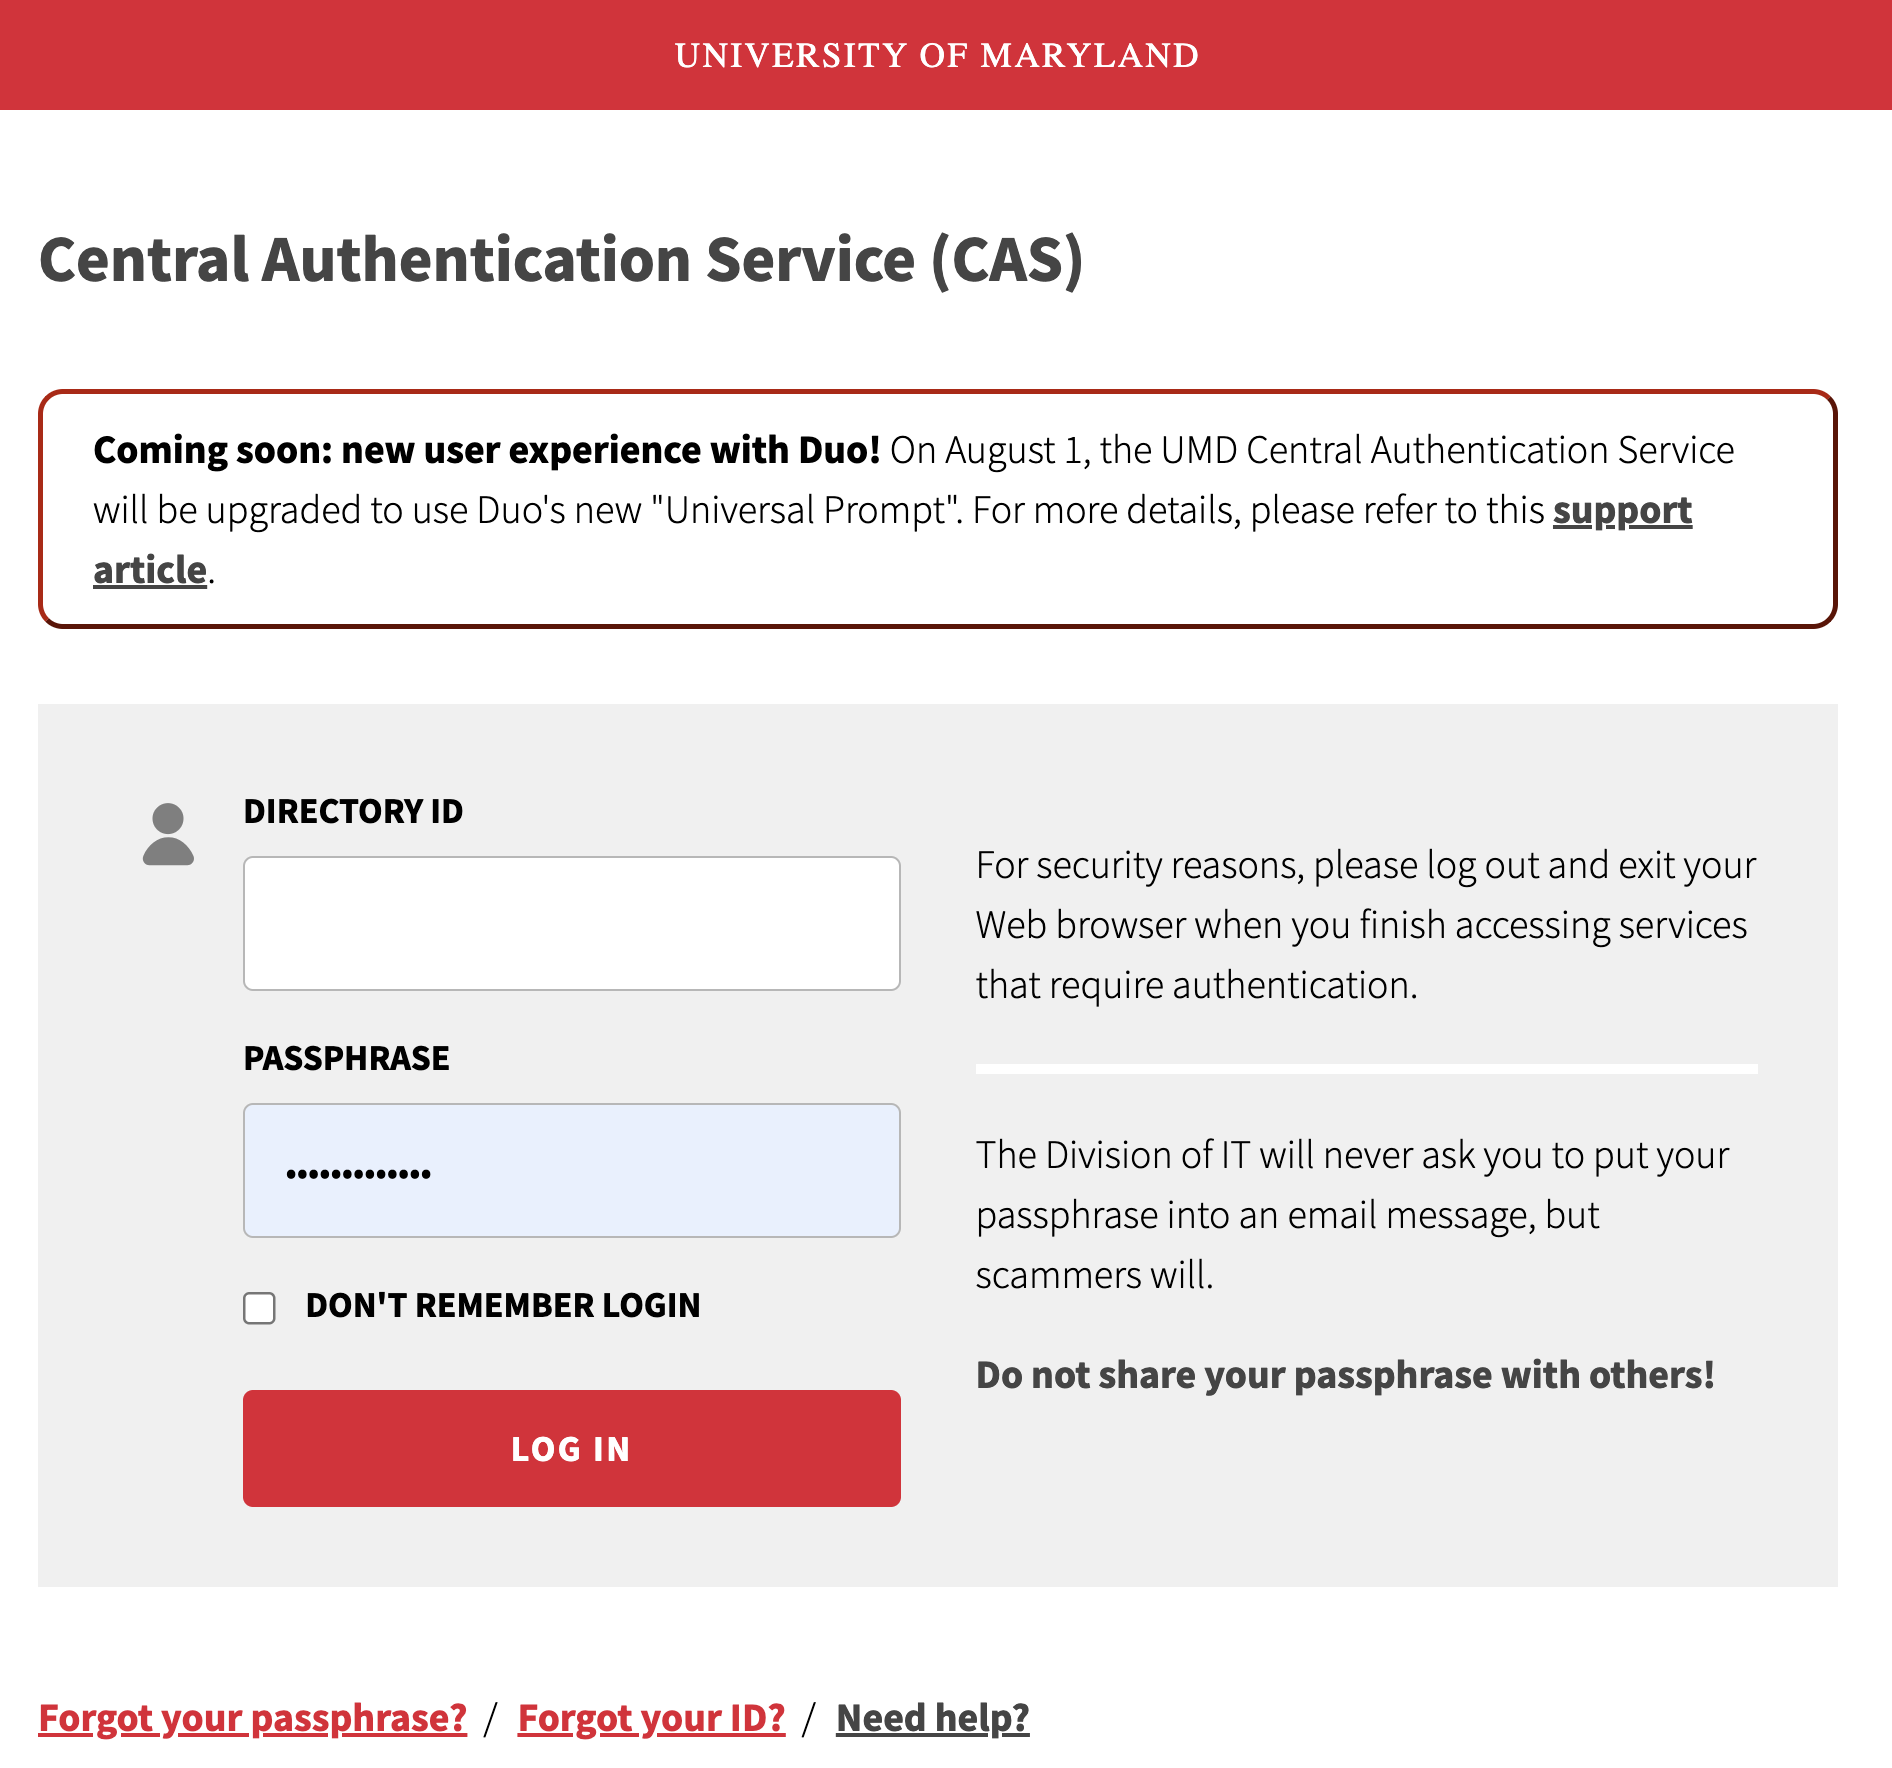 Screen shot for the Central Authentication Service (CAS) login screen.